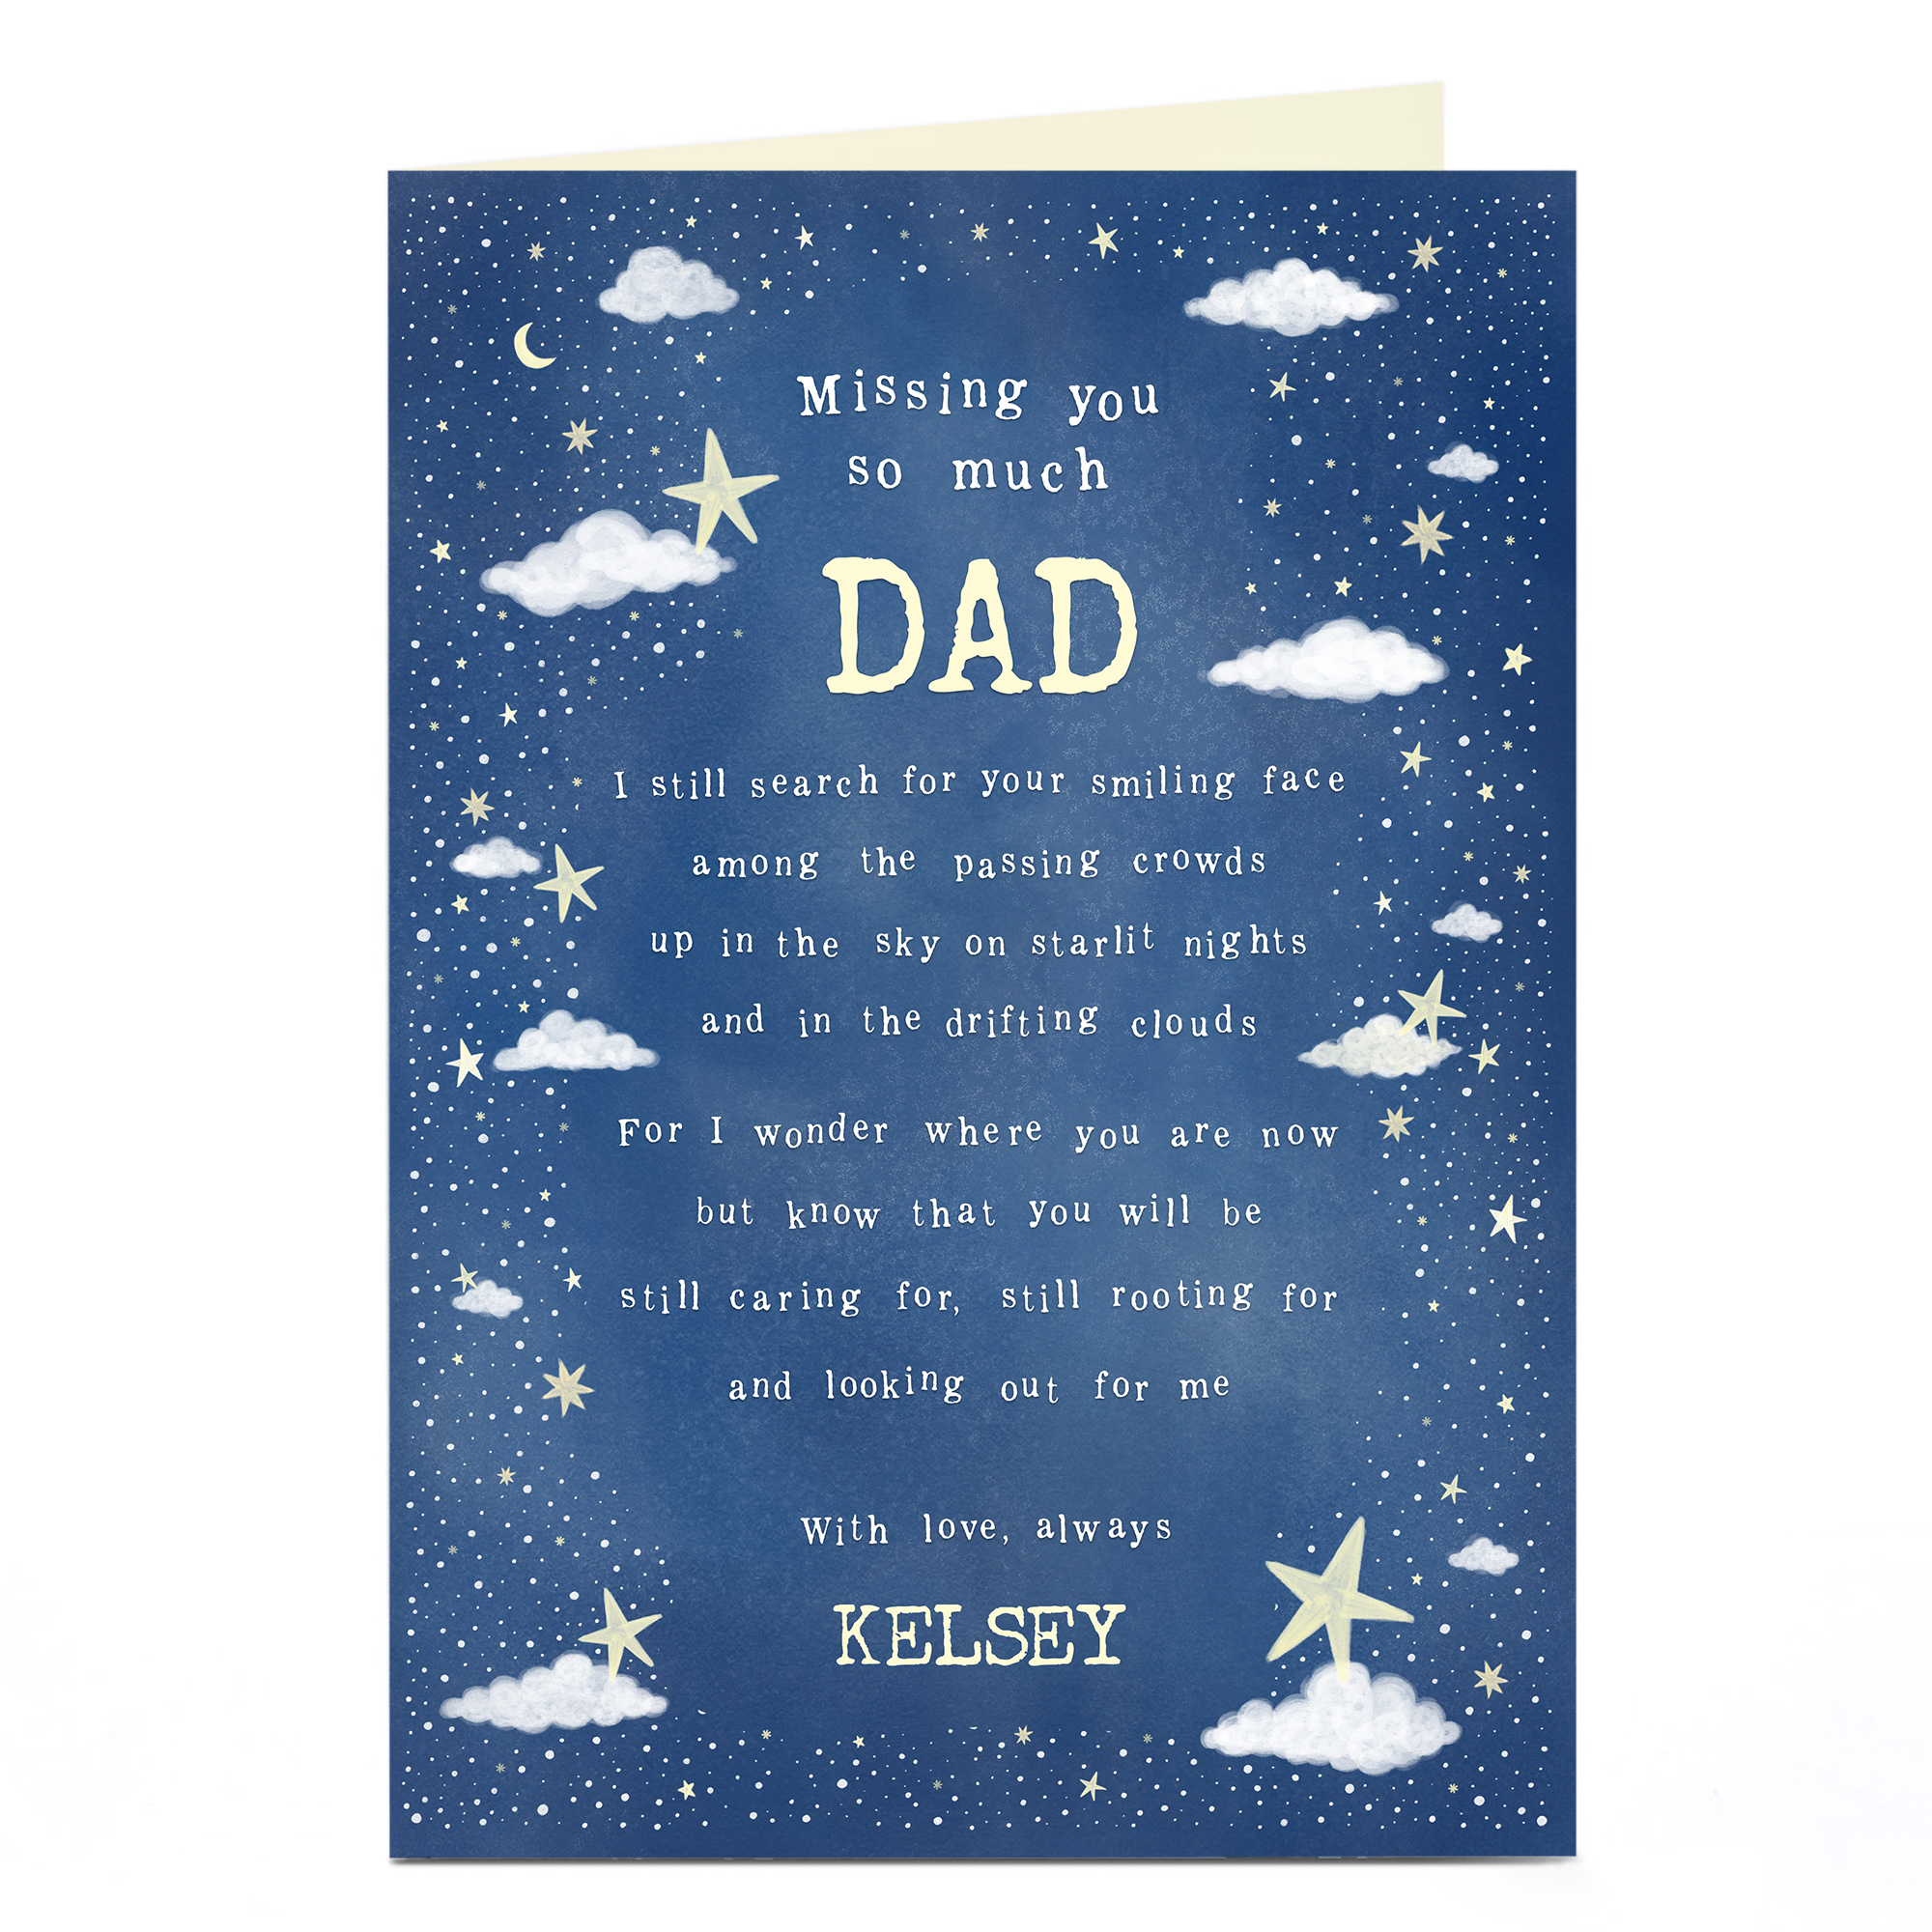 Personalised Father's Day Card - Missing You So Much Dad